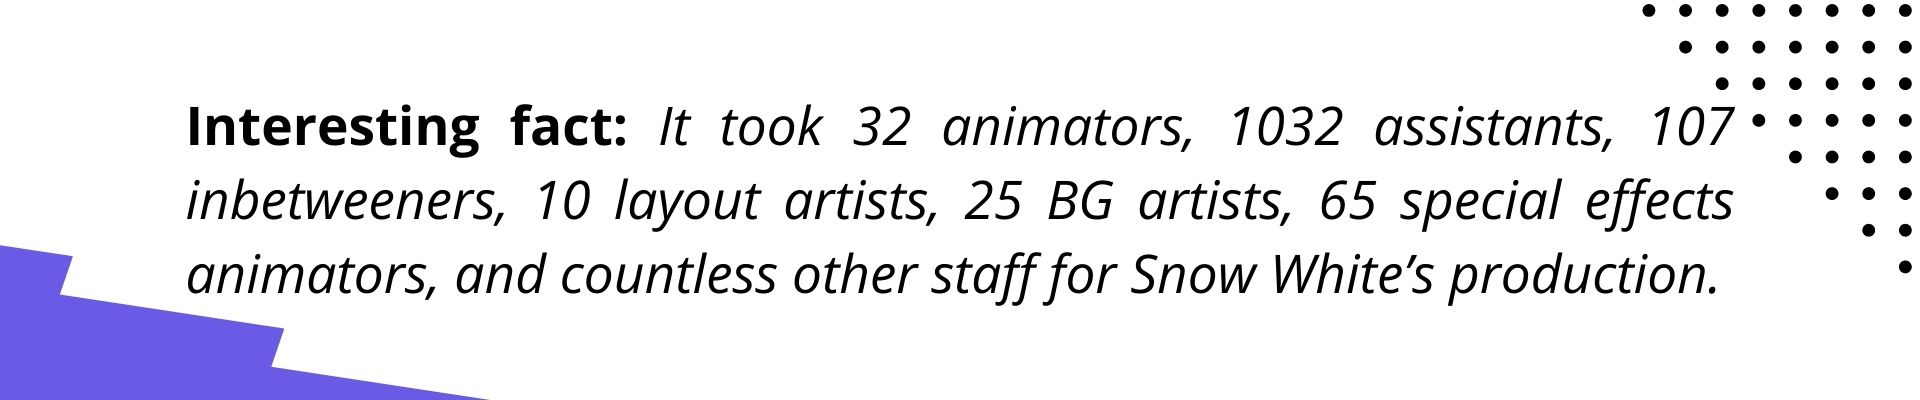 Interesting fact: It took 32 animators, 1032 assistants, 107 inbetweeners, 10 layout artists, 25 BG artists, 65 special effects animators, and countless other staff for Snow White’s production.